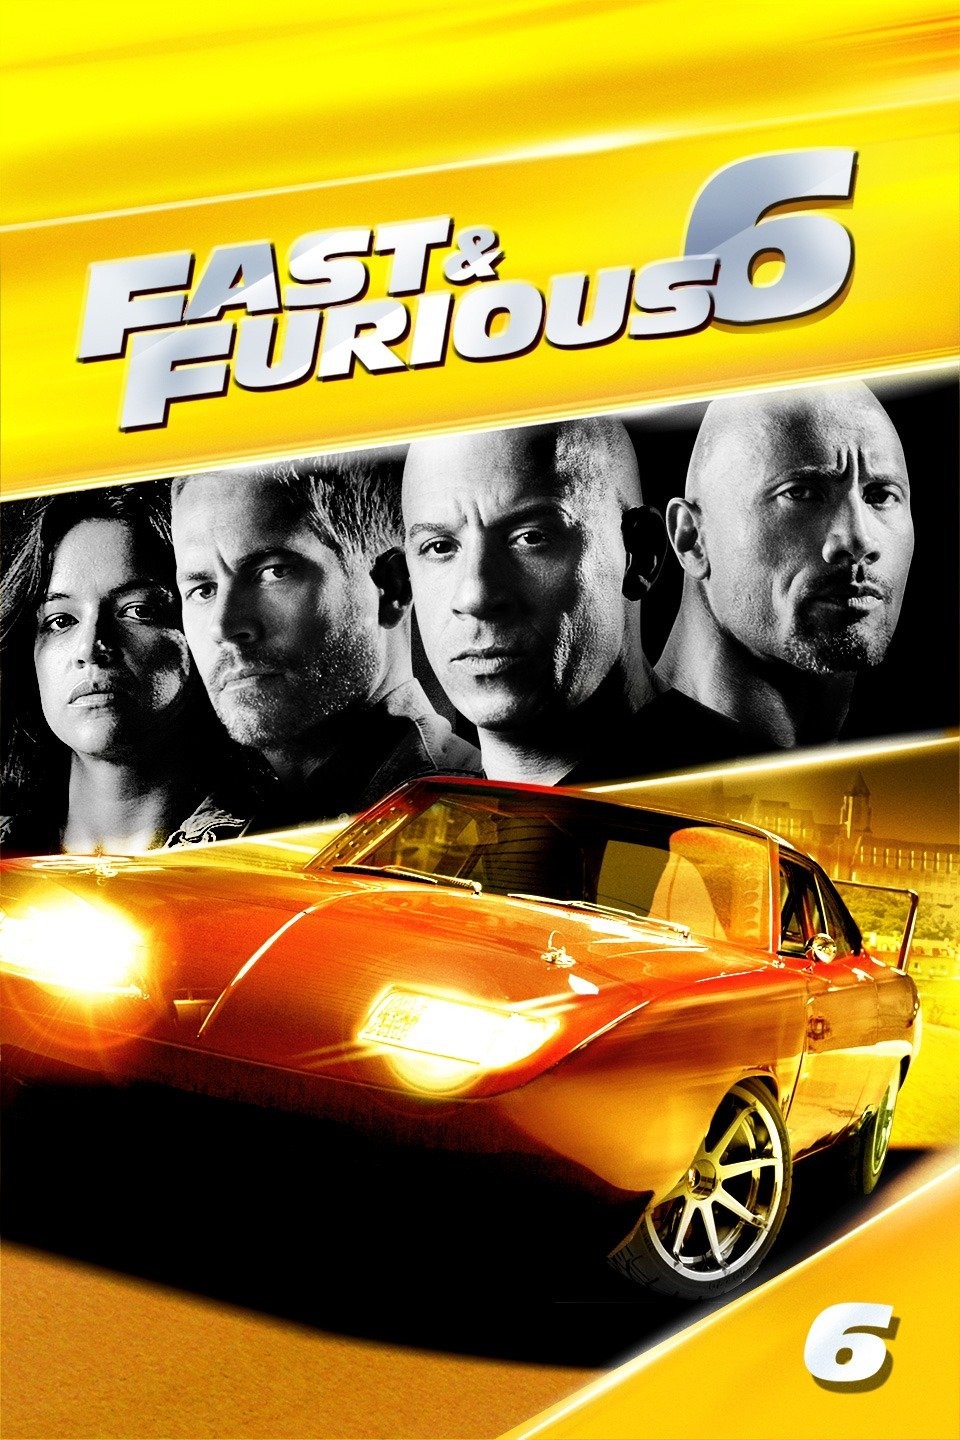 Here are some interesting facts about the “Fast and Furious” franchise